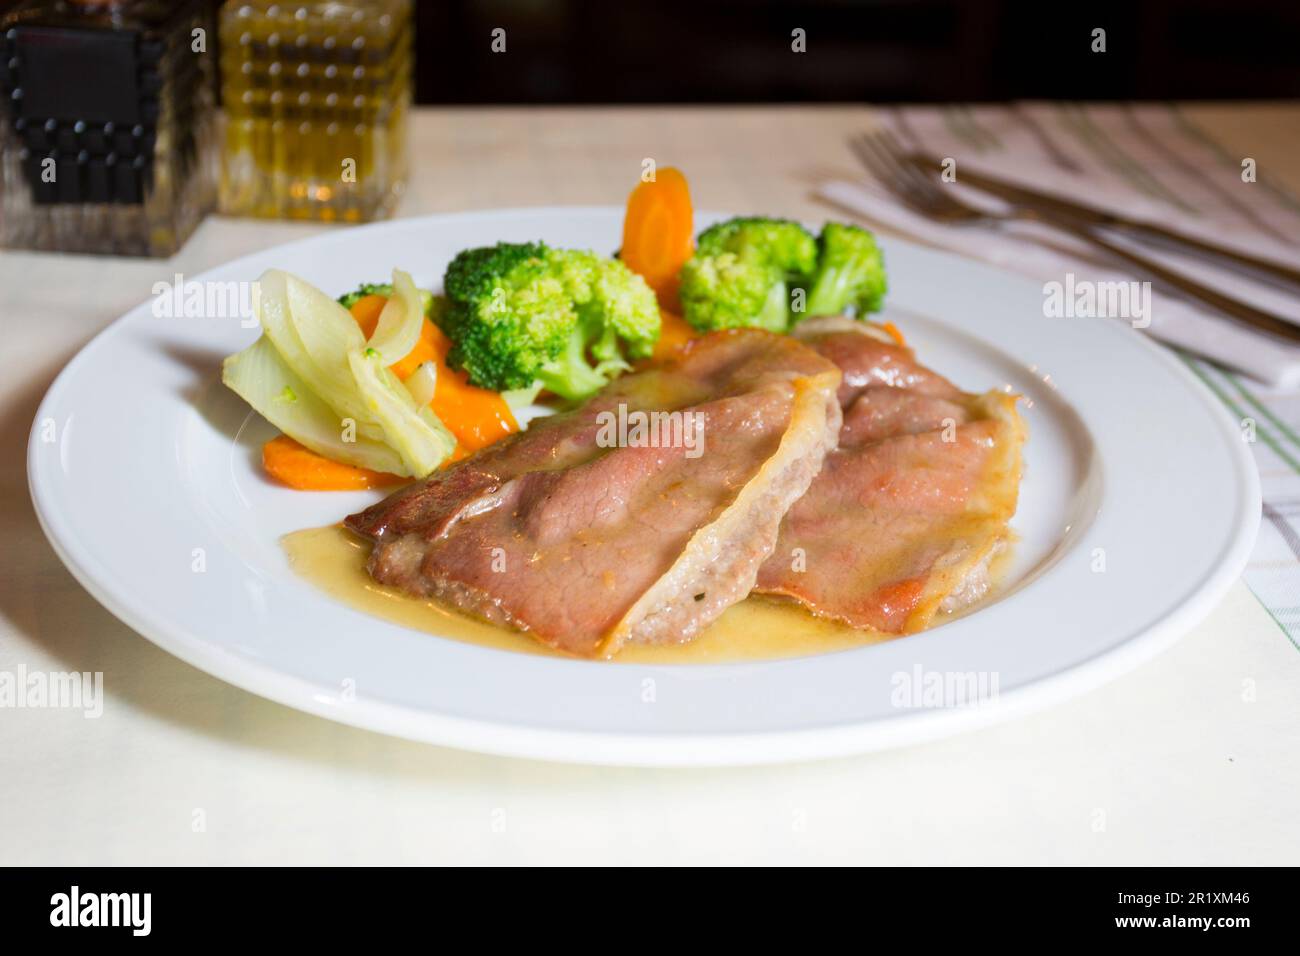 Pork loin covered with bacon and served with vegetables such as broccoli or carrots. Stock Photo